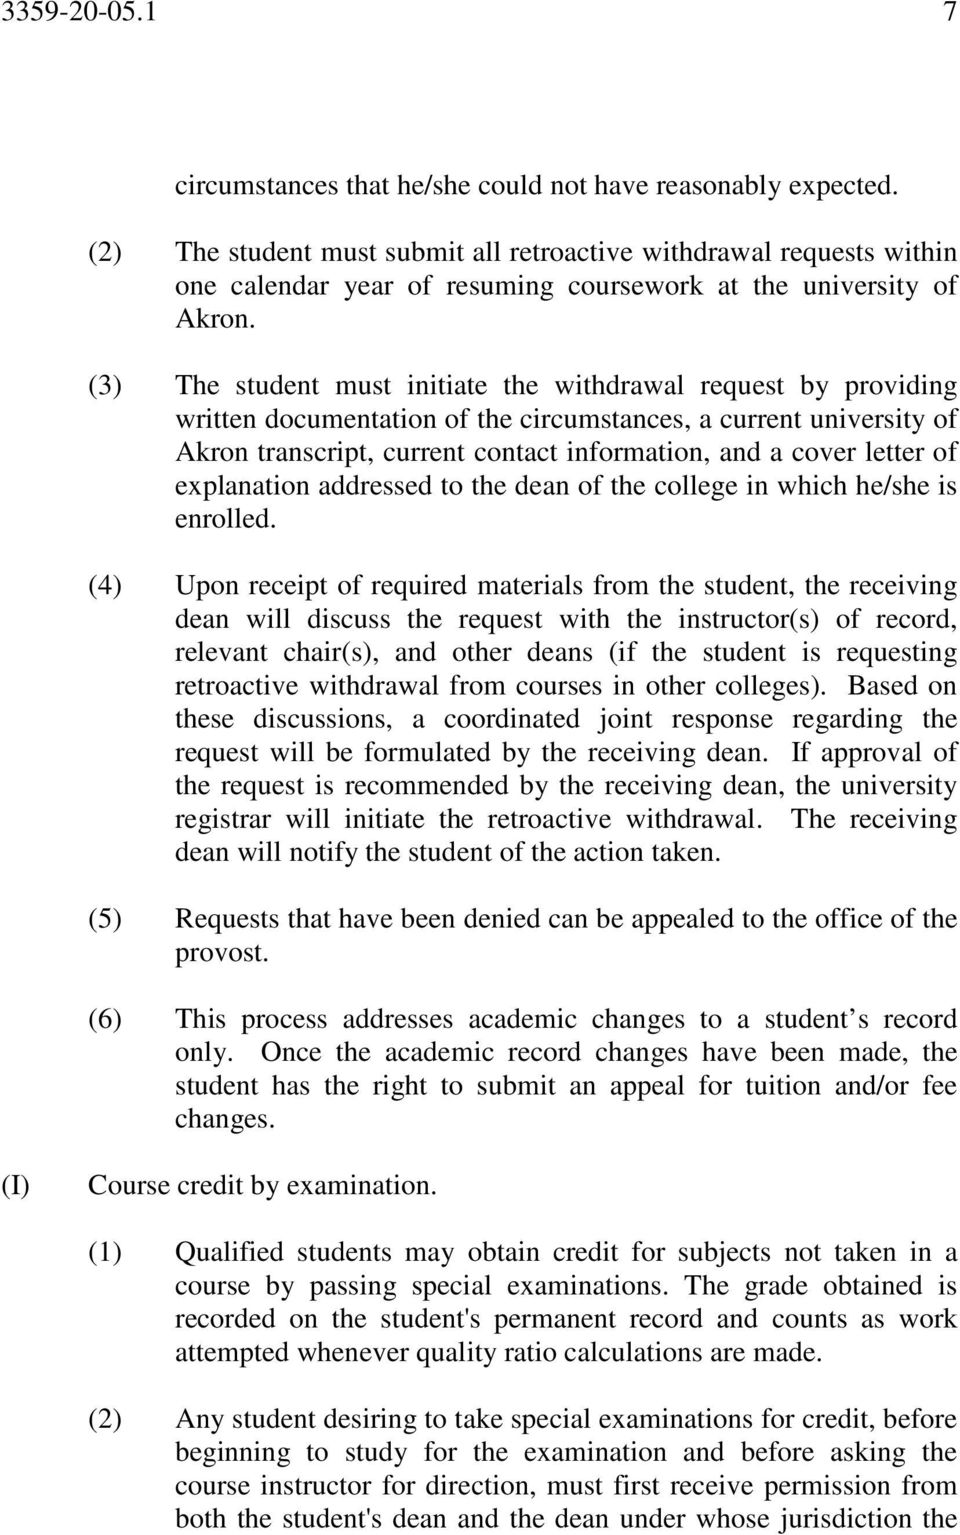 (3) The student must initiate the withdrawal request by providing written documentation of the circumstances, a current university of Akron transcript, current contact information, and a cover letter